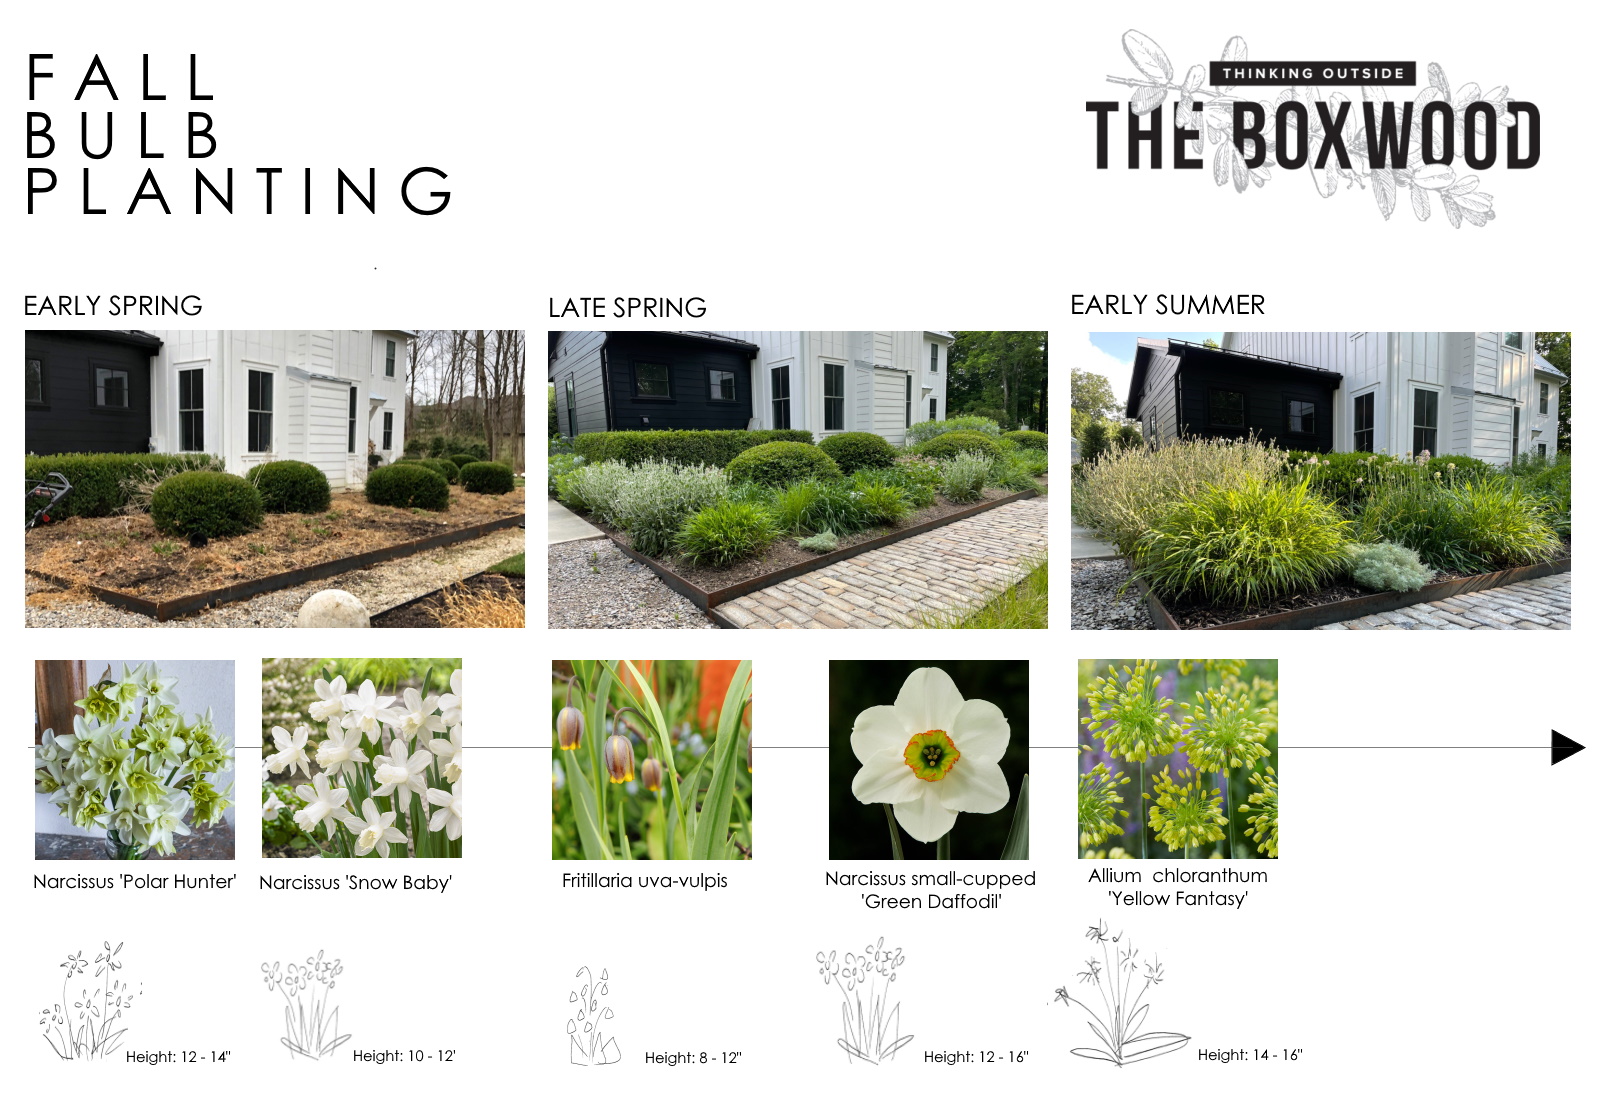 How to select spring and early summer flowering bulbs for bloom sequence and height within exisiting perennial garden - Thinking Outside the boxwood